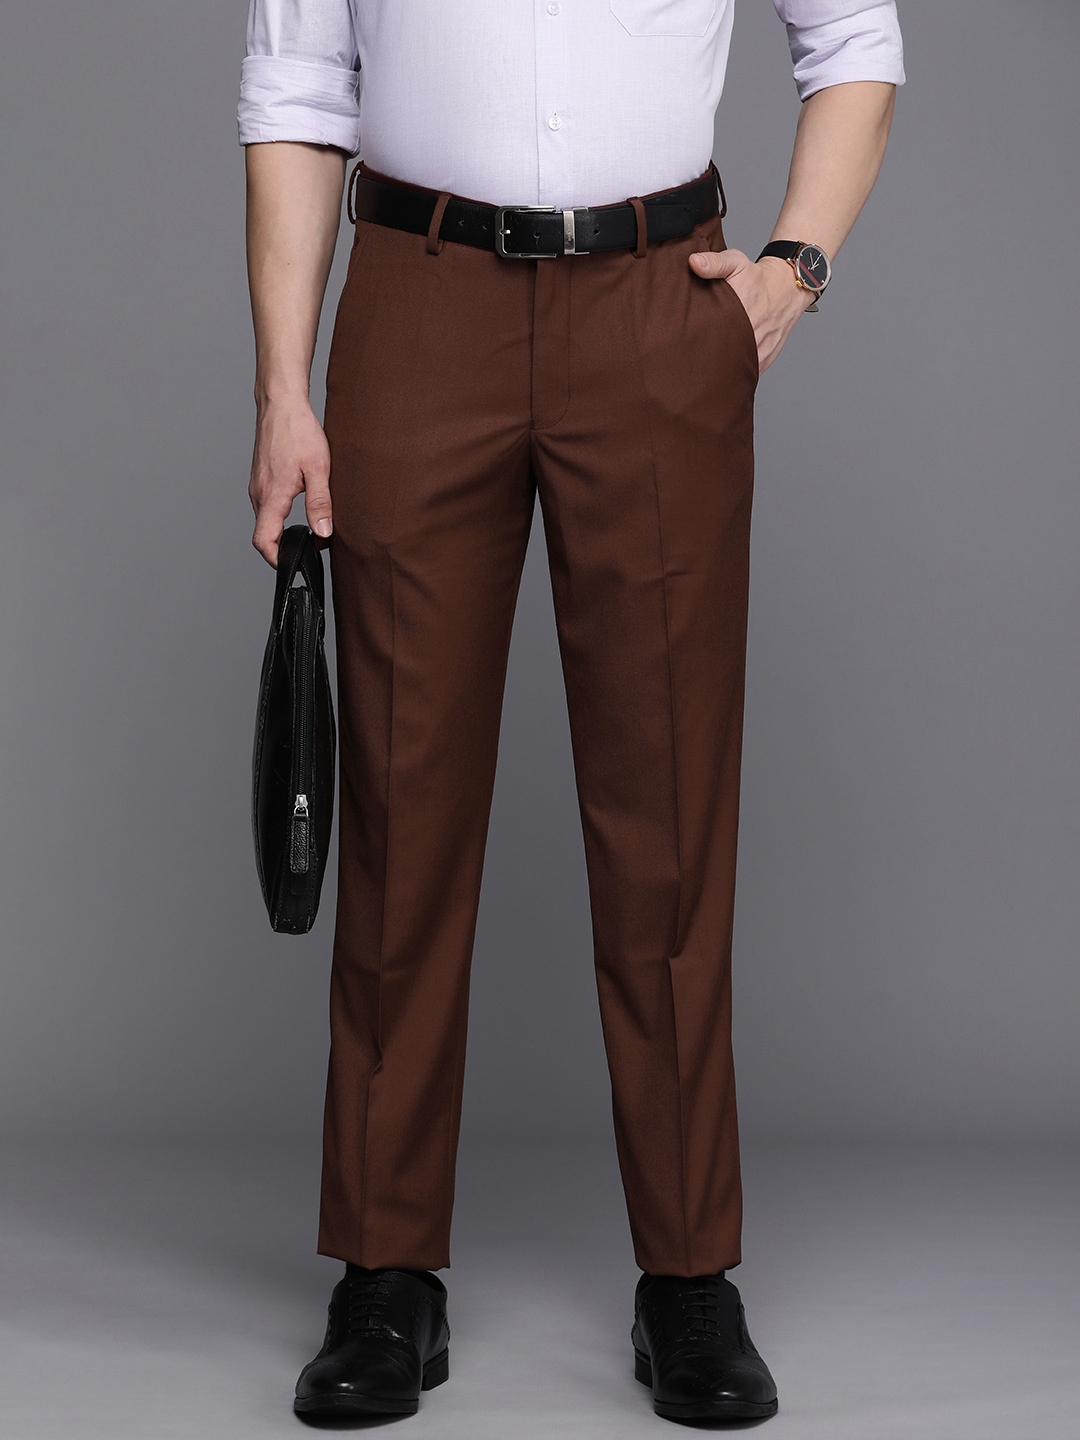 Louis Philippe Sport Casual Trousers : Buy Louis Philippe Sport Brown Solid  Trousers Online